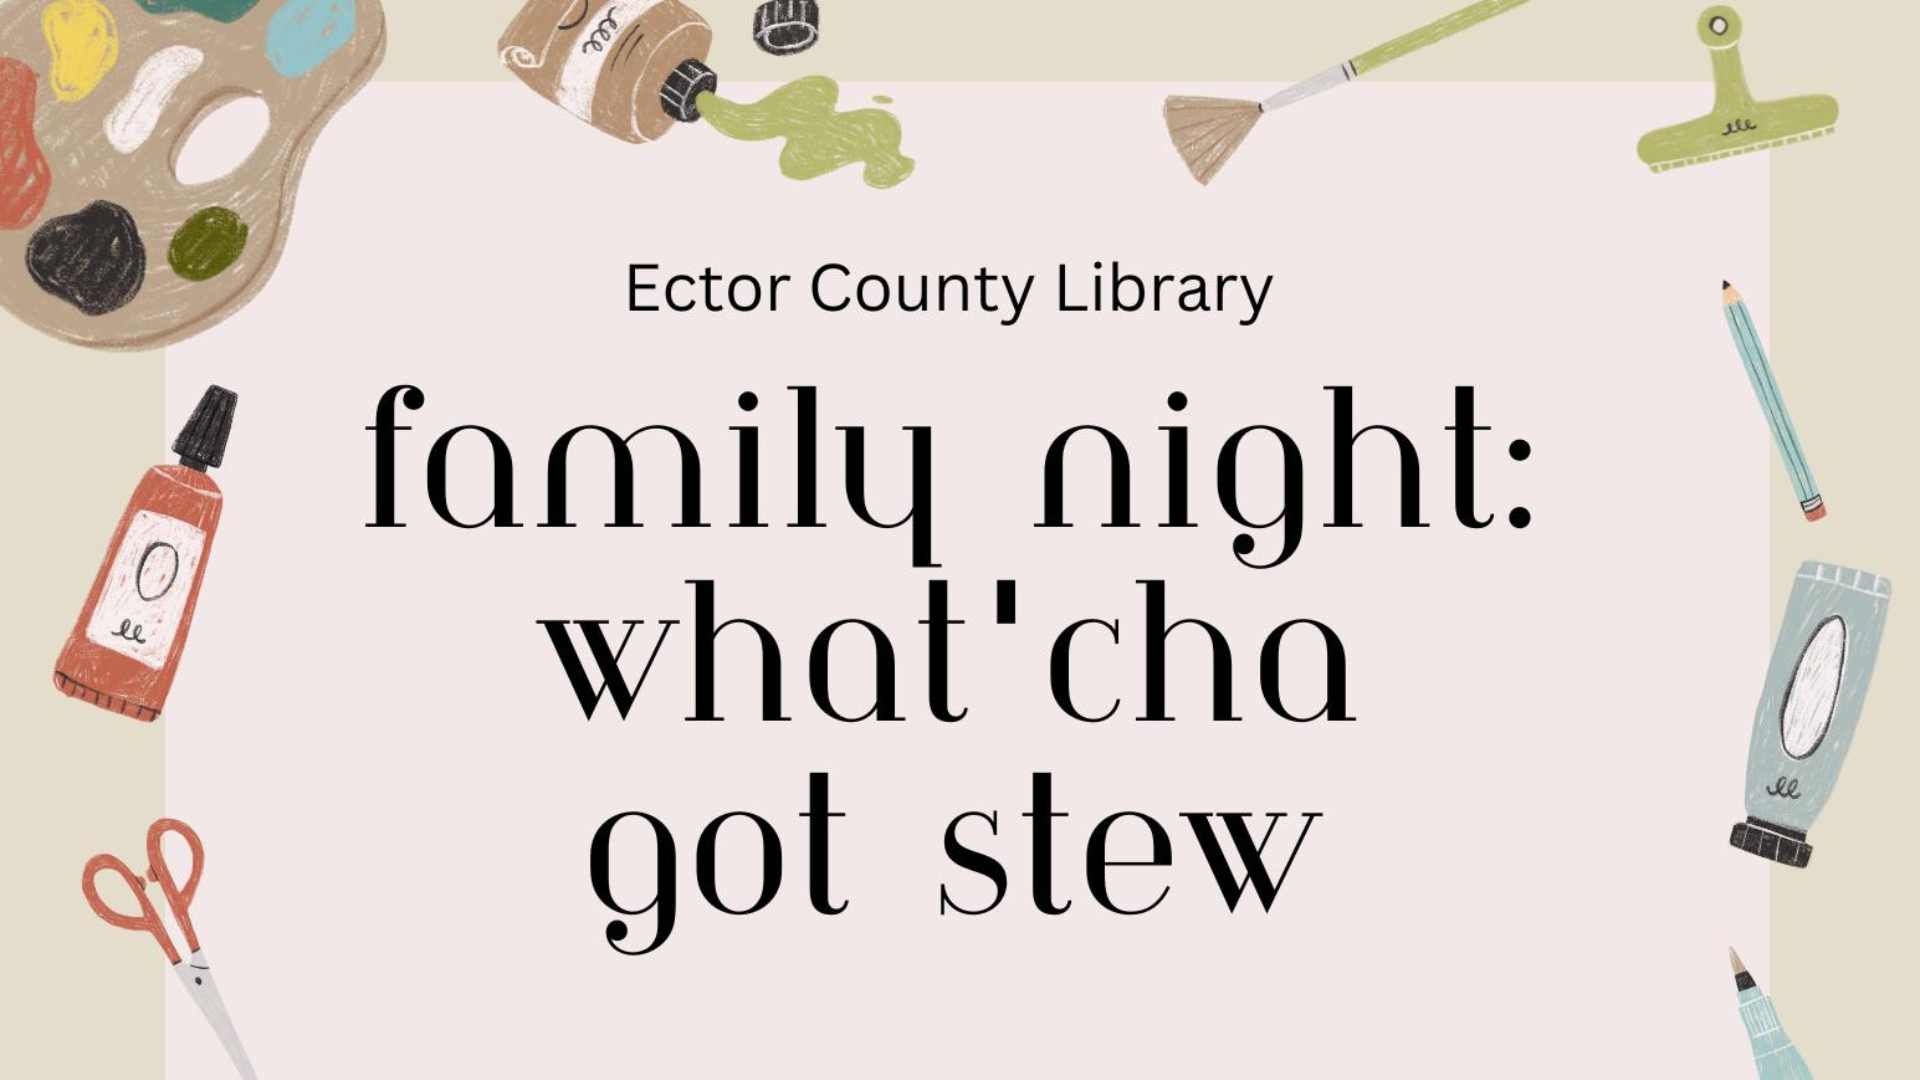 Family Night Art Night at the Ector County Library